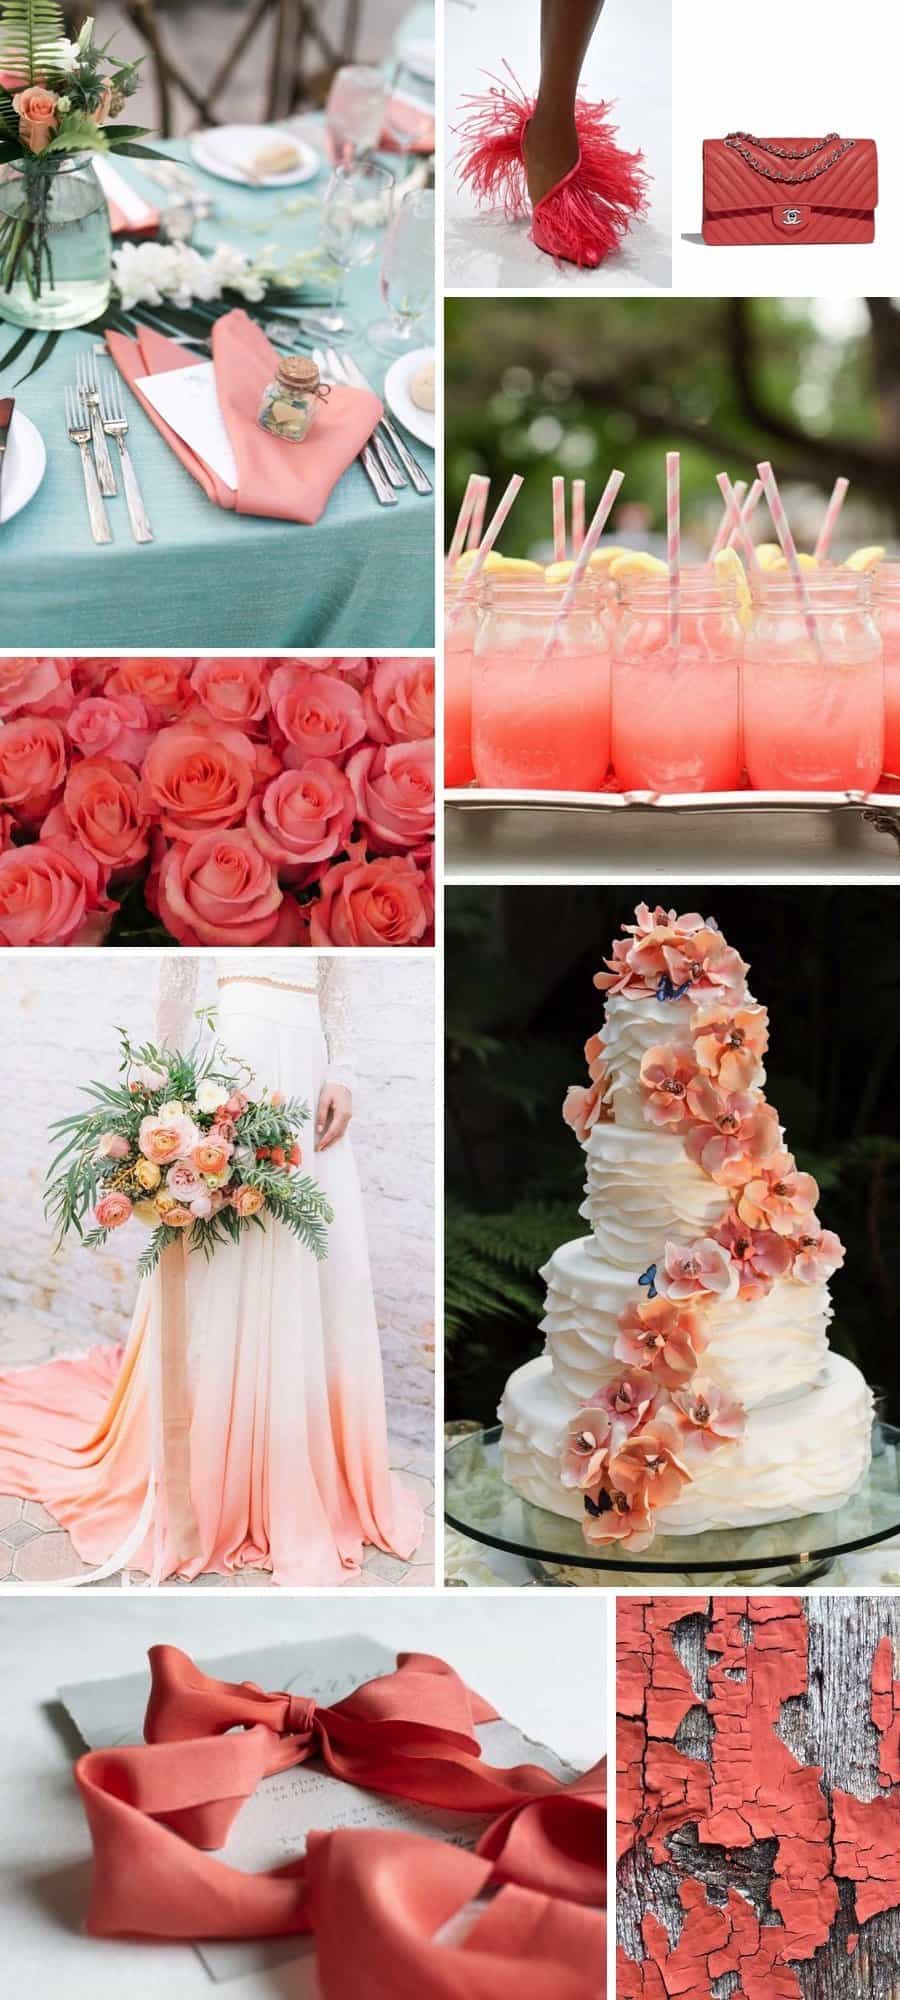 Pantone Colour of the Year: Living Coral